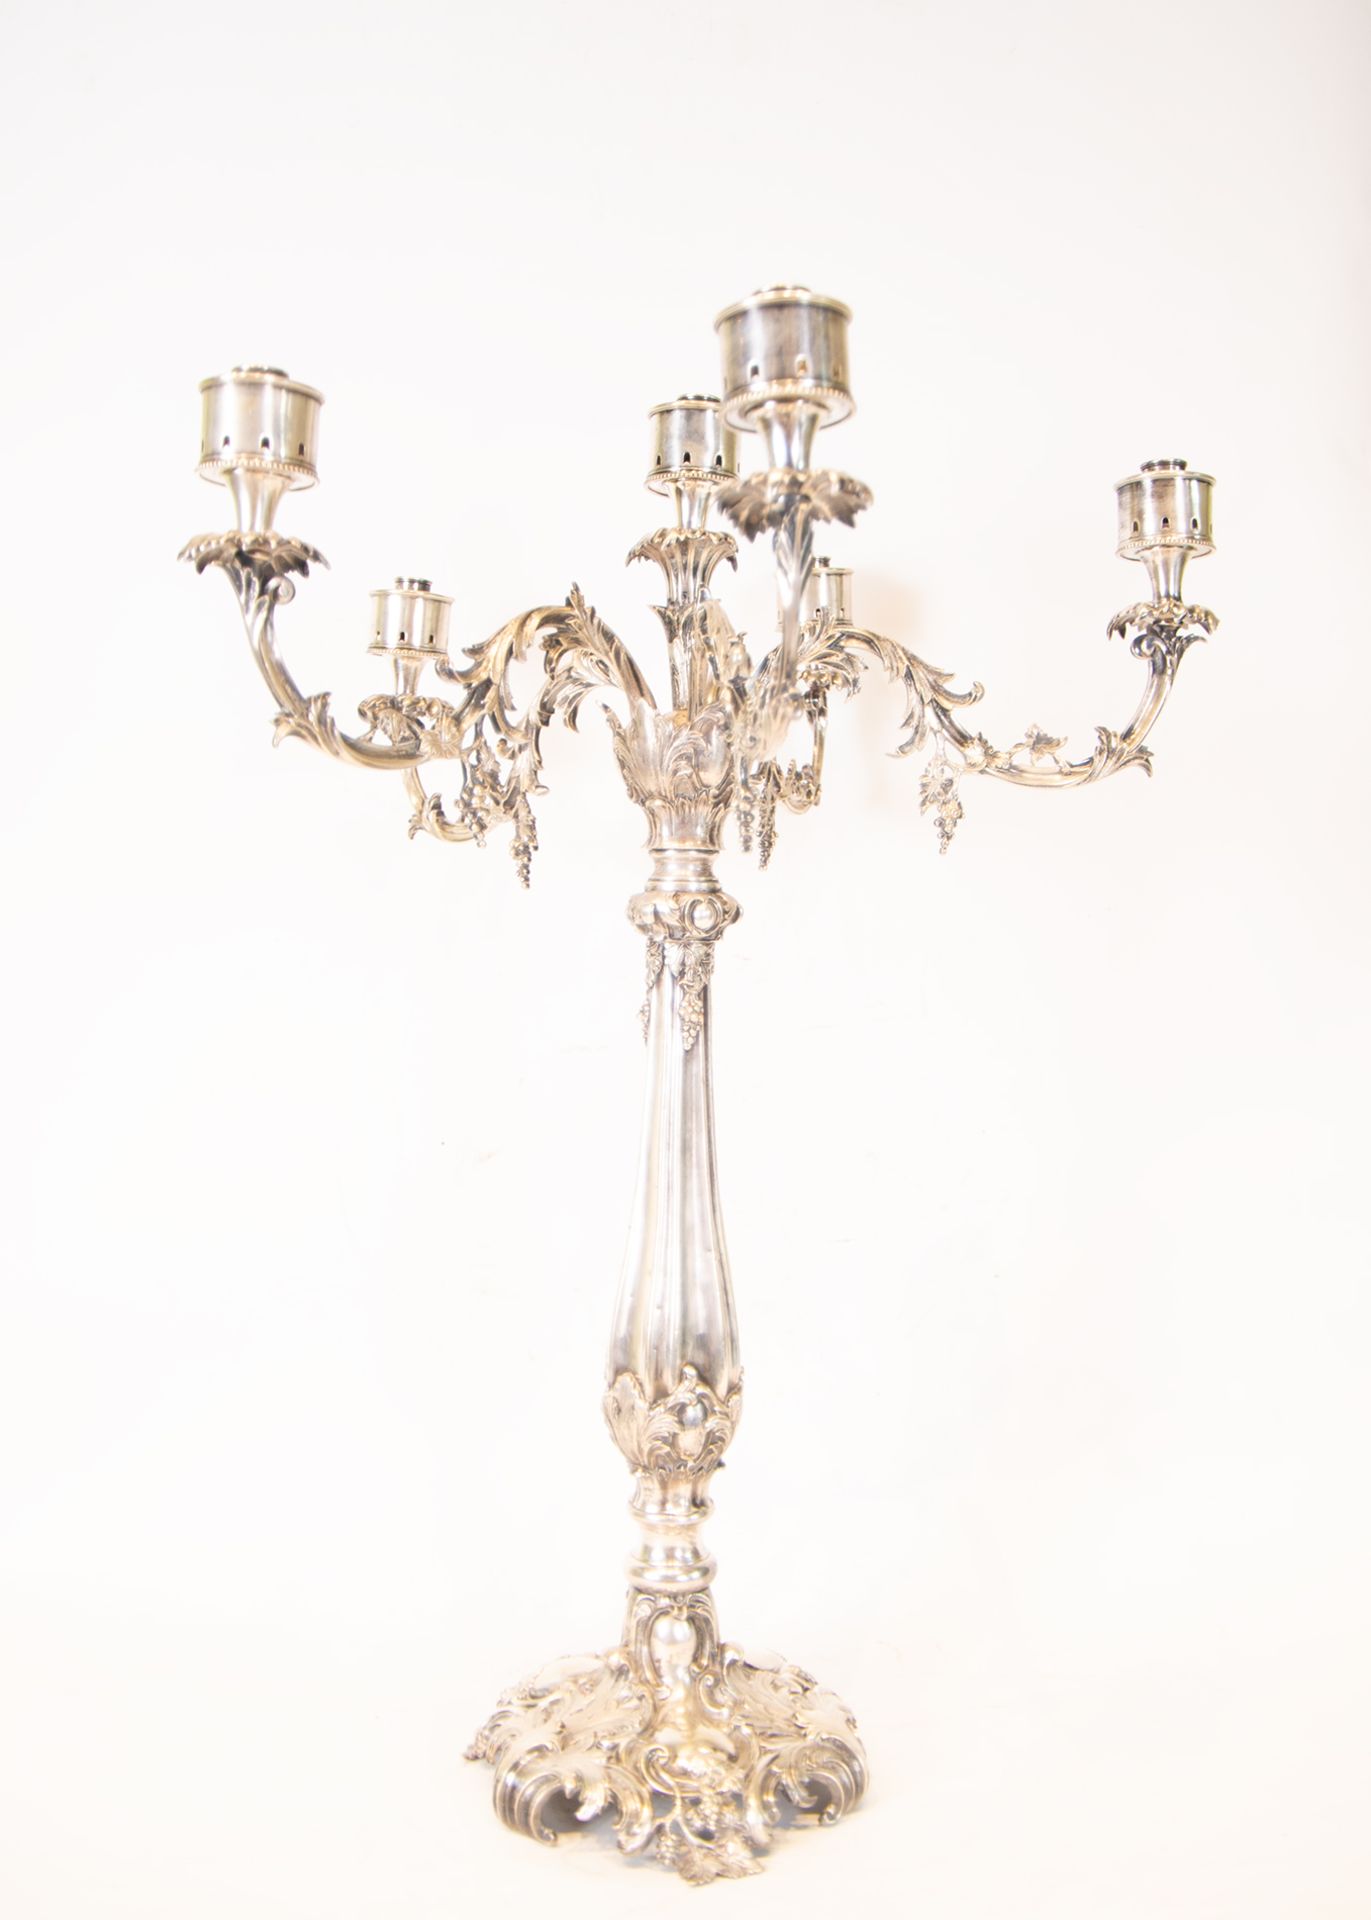 Large Pair of Victorian-style Silver-Gilt Candelabra, 19th century - Image 2 of 7